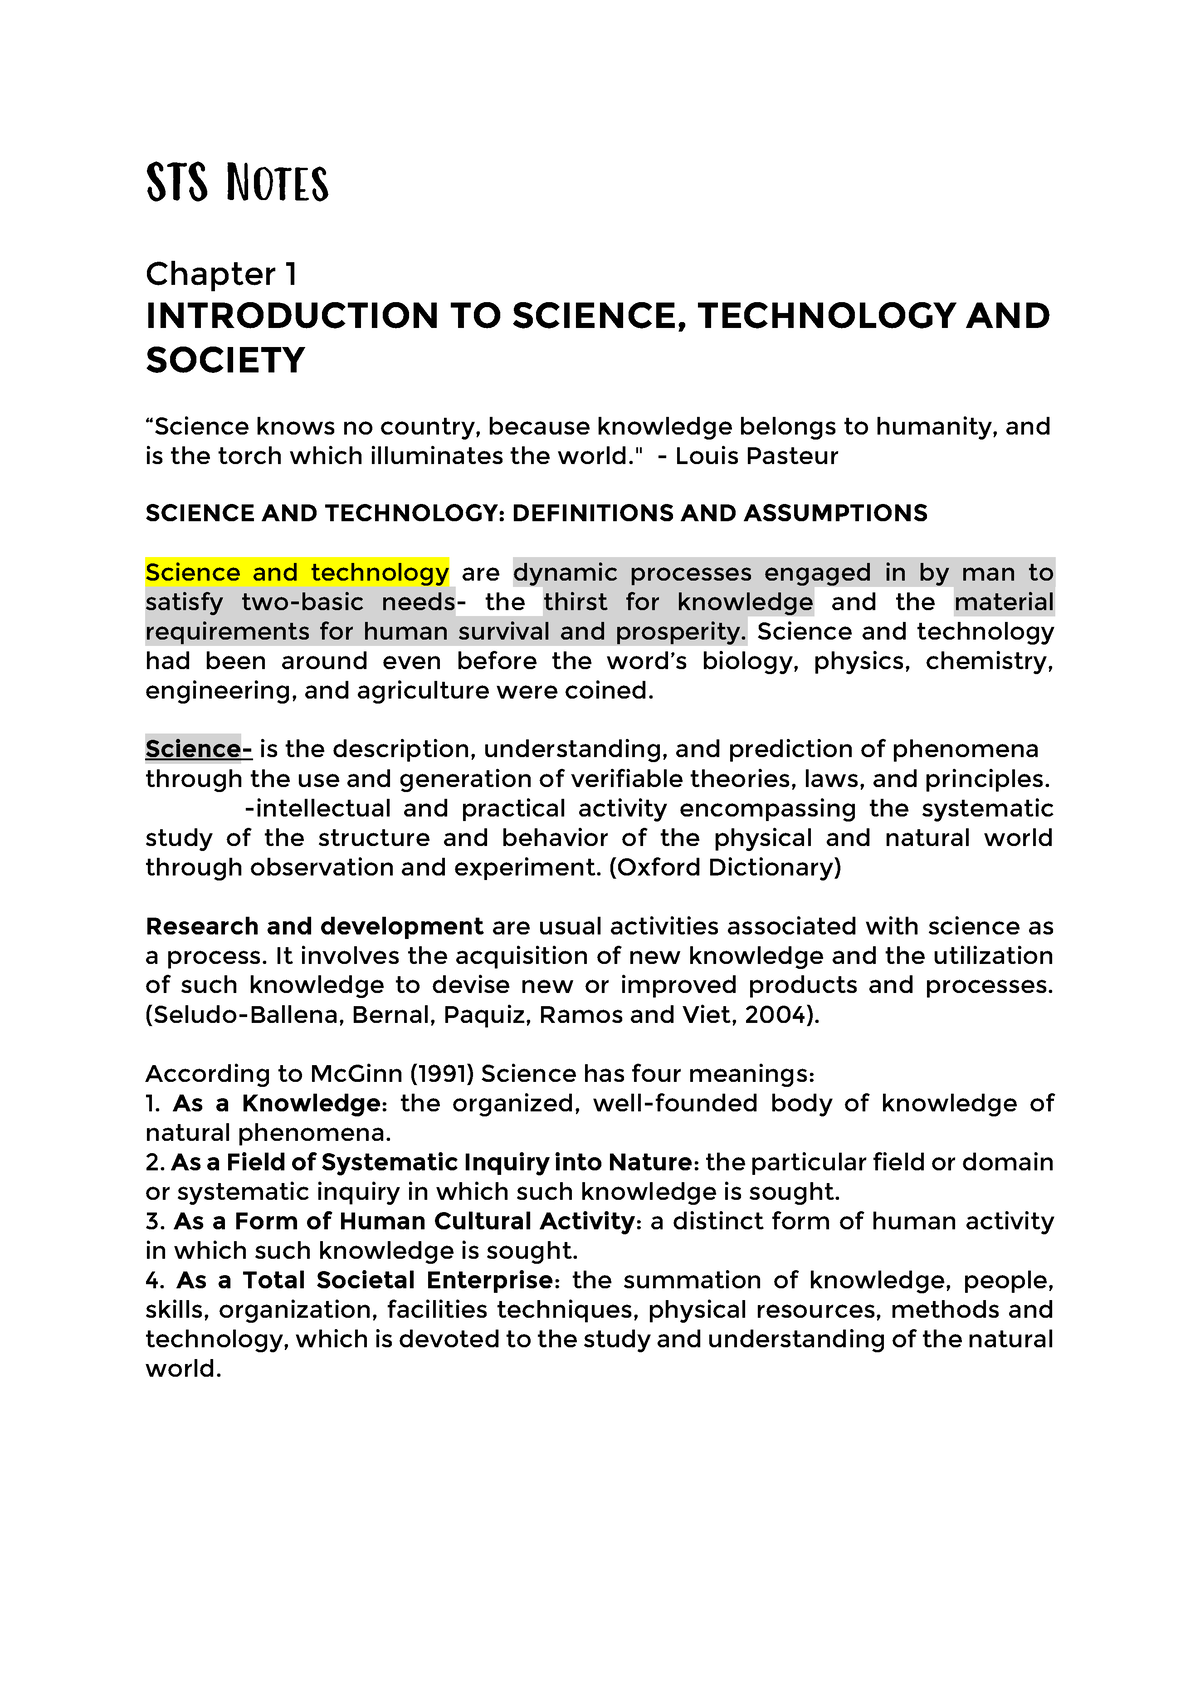 essay about advancement in science and technology